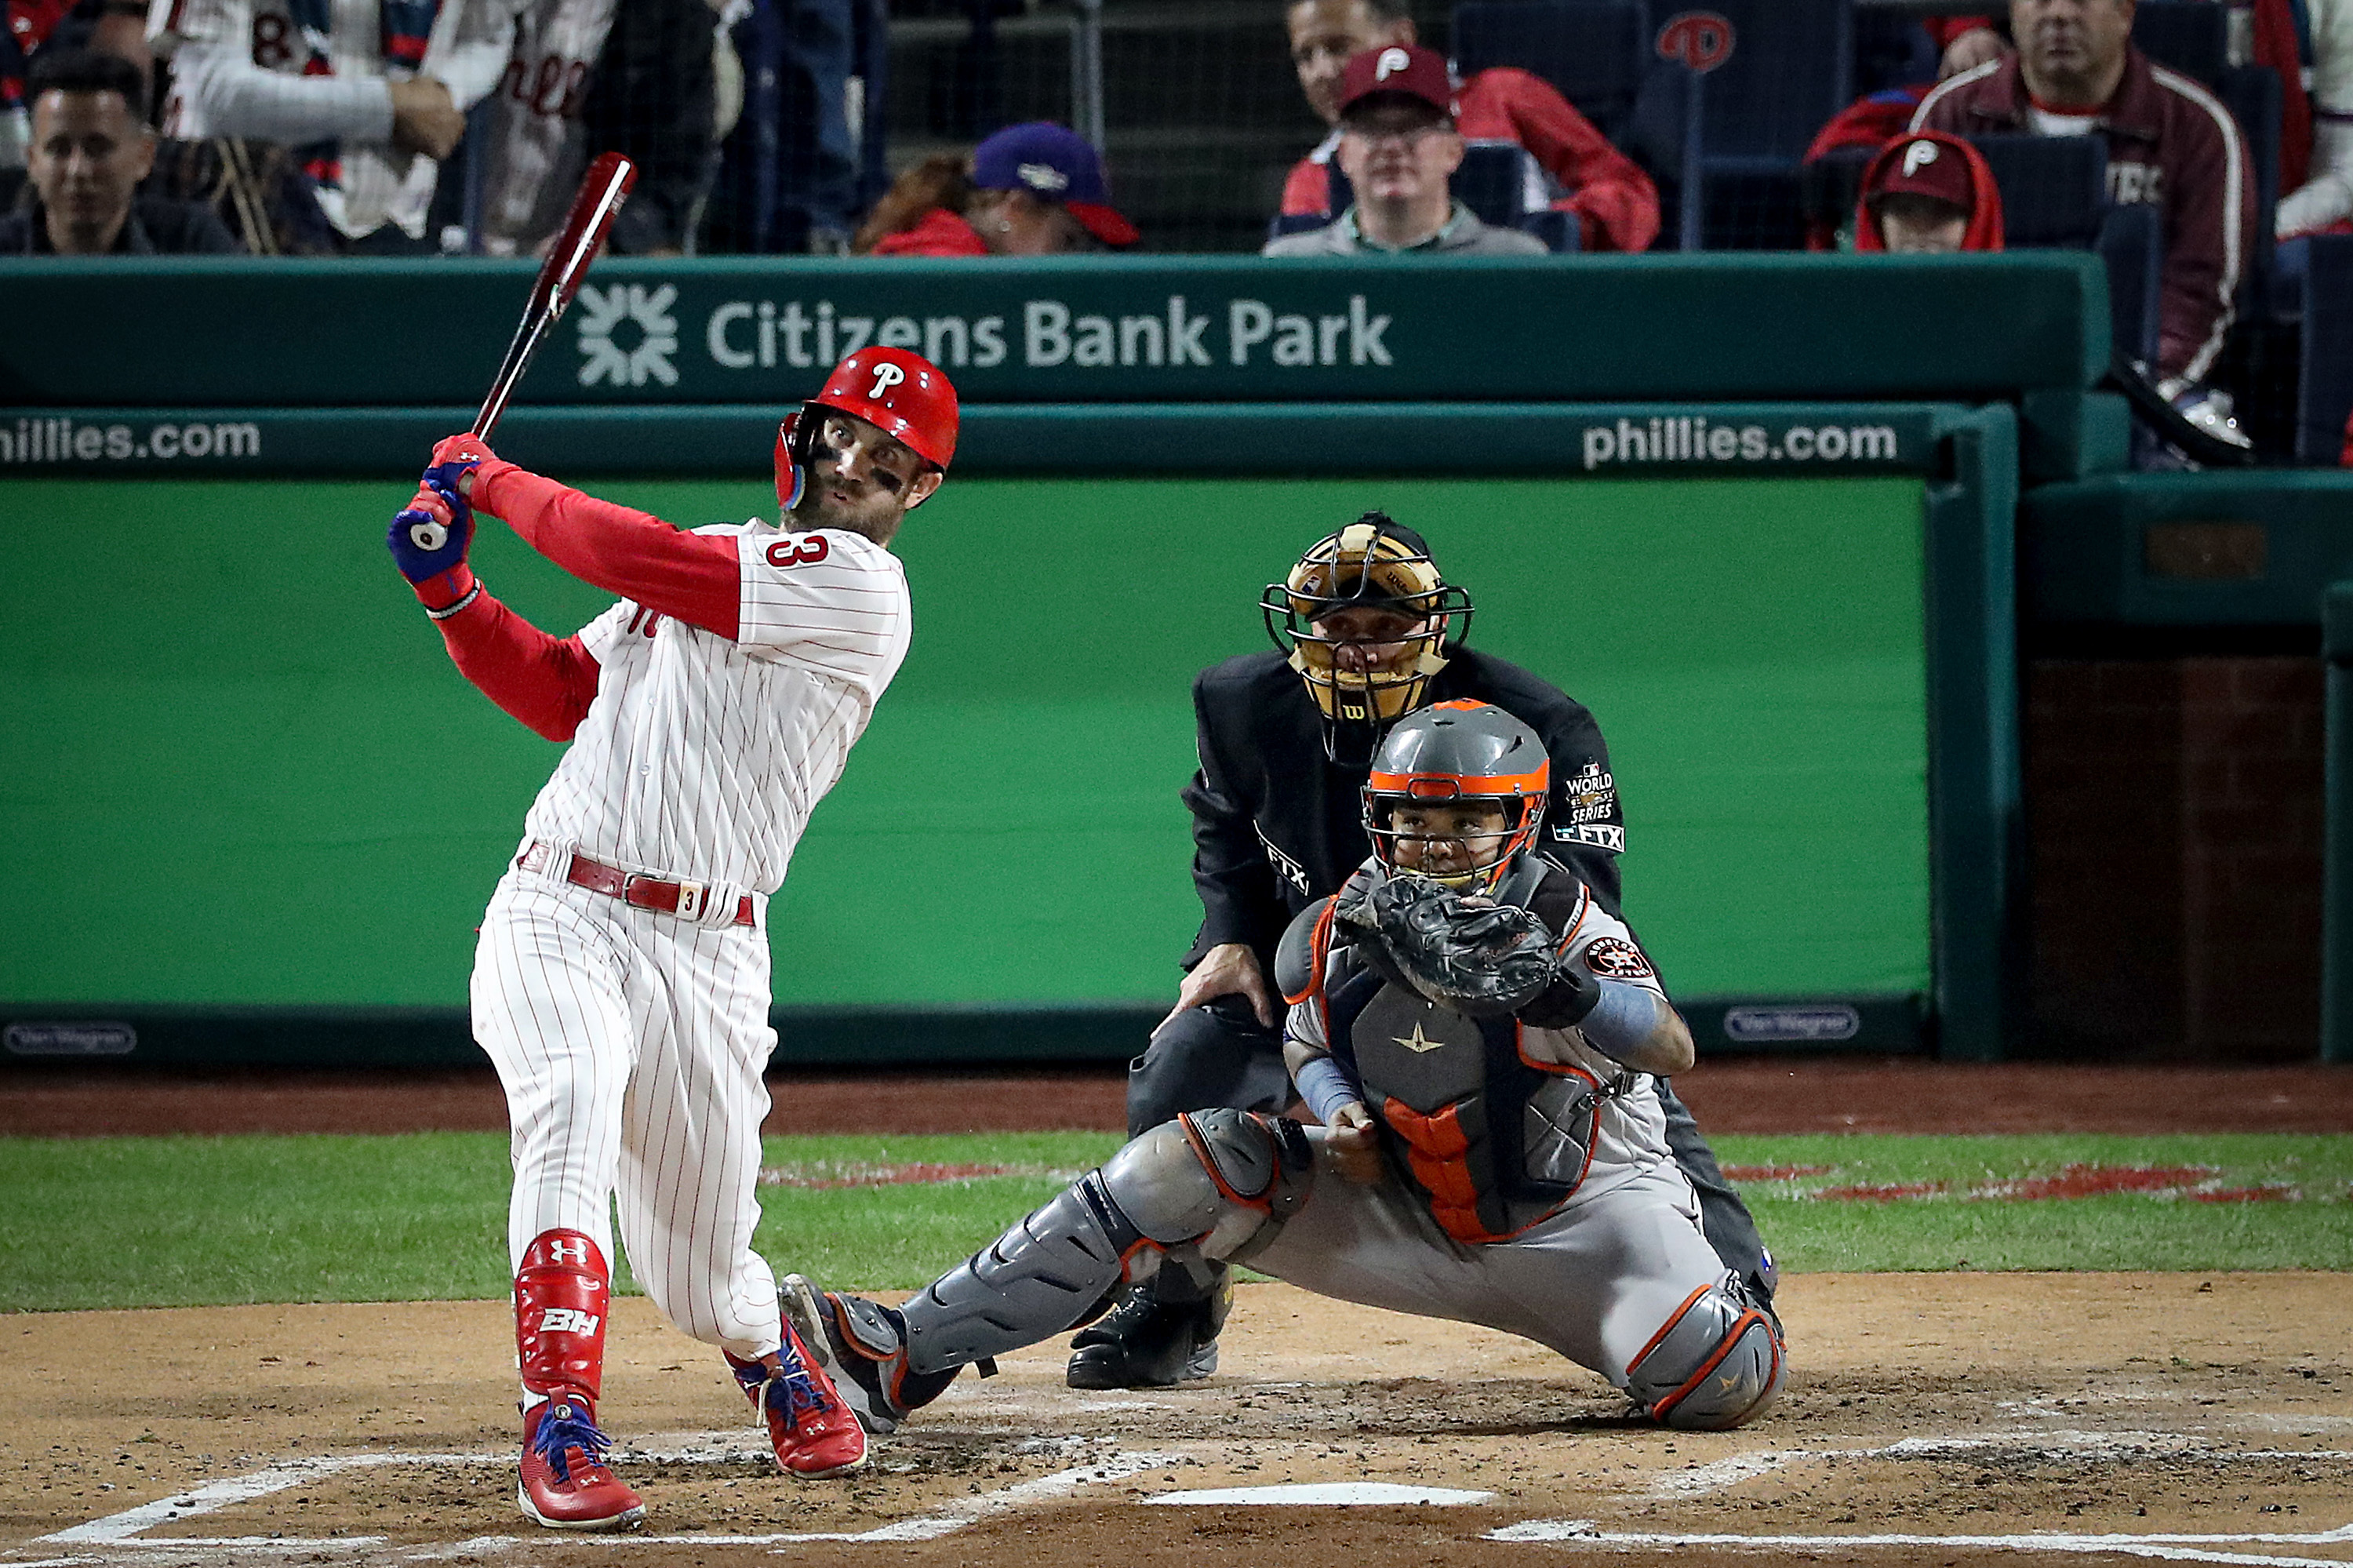 Bryce Harper's World Series homer sets tone for Phillies vs. Astros